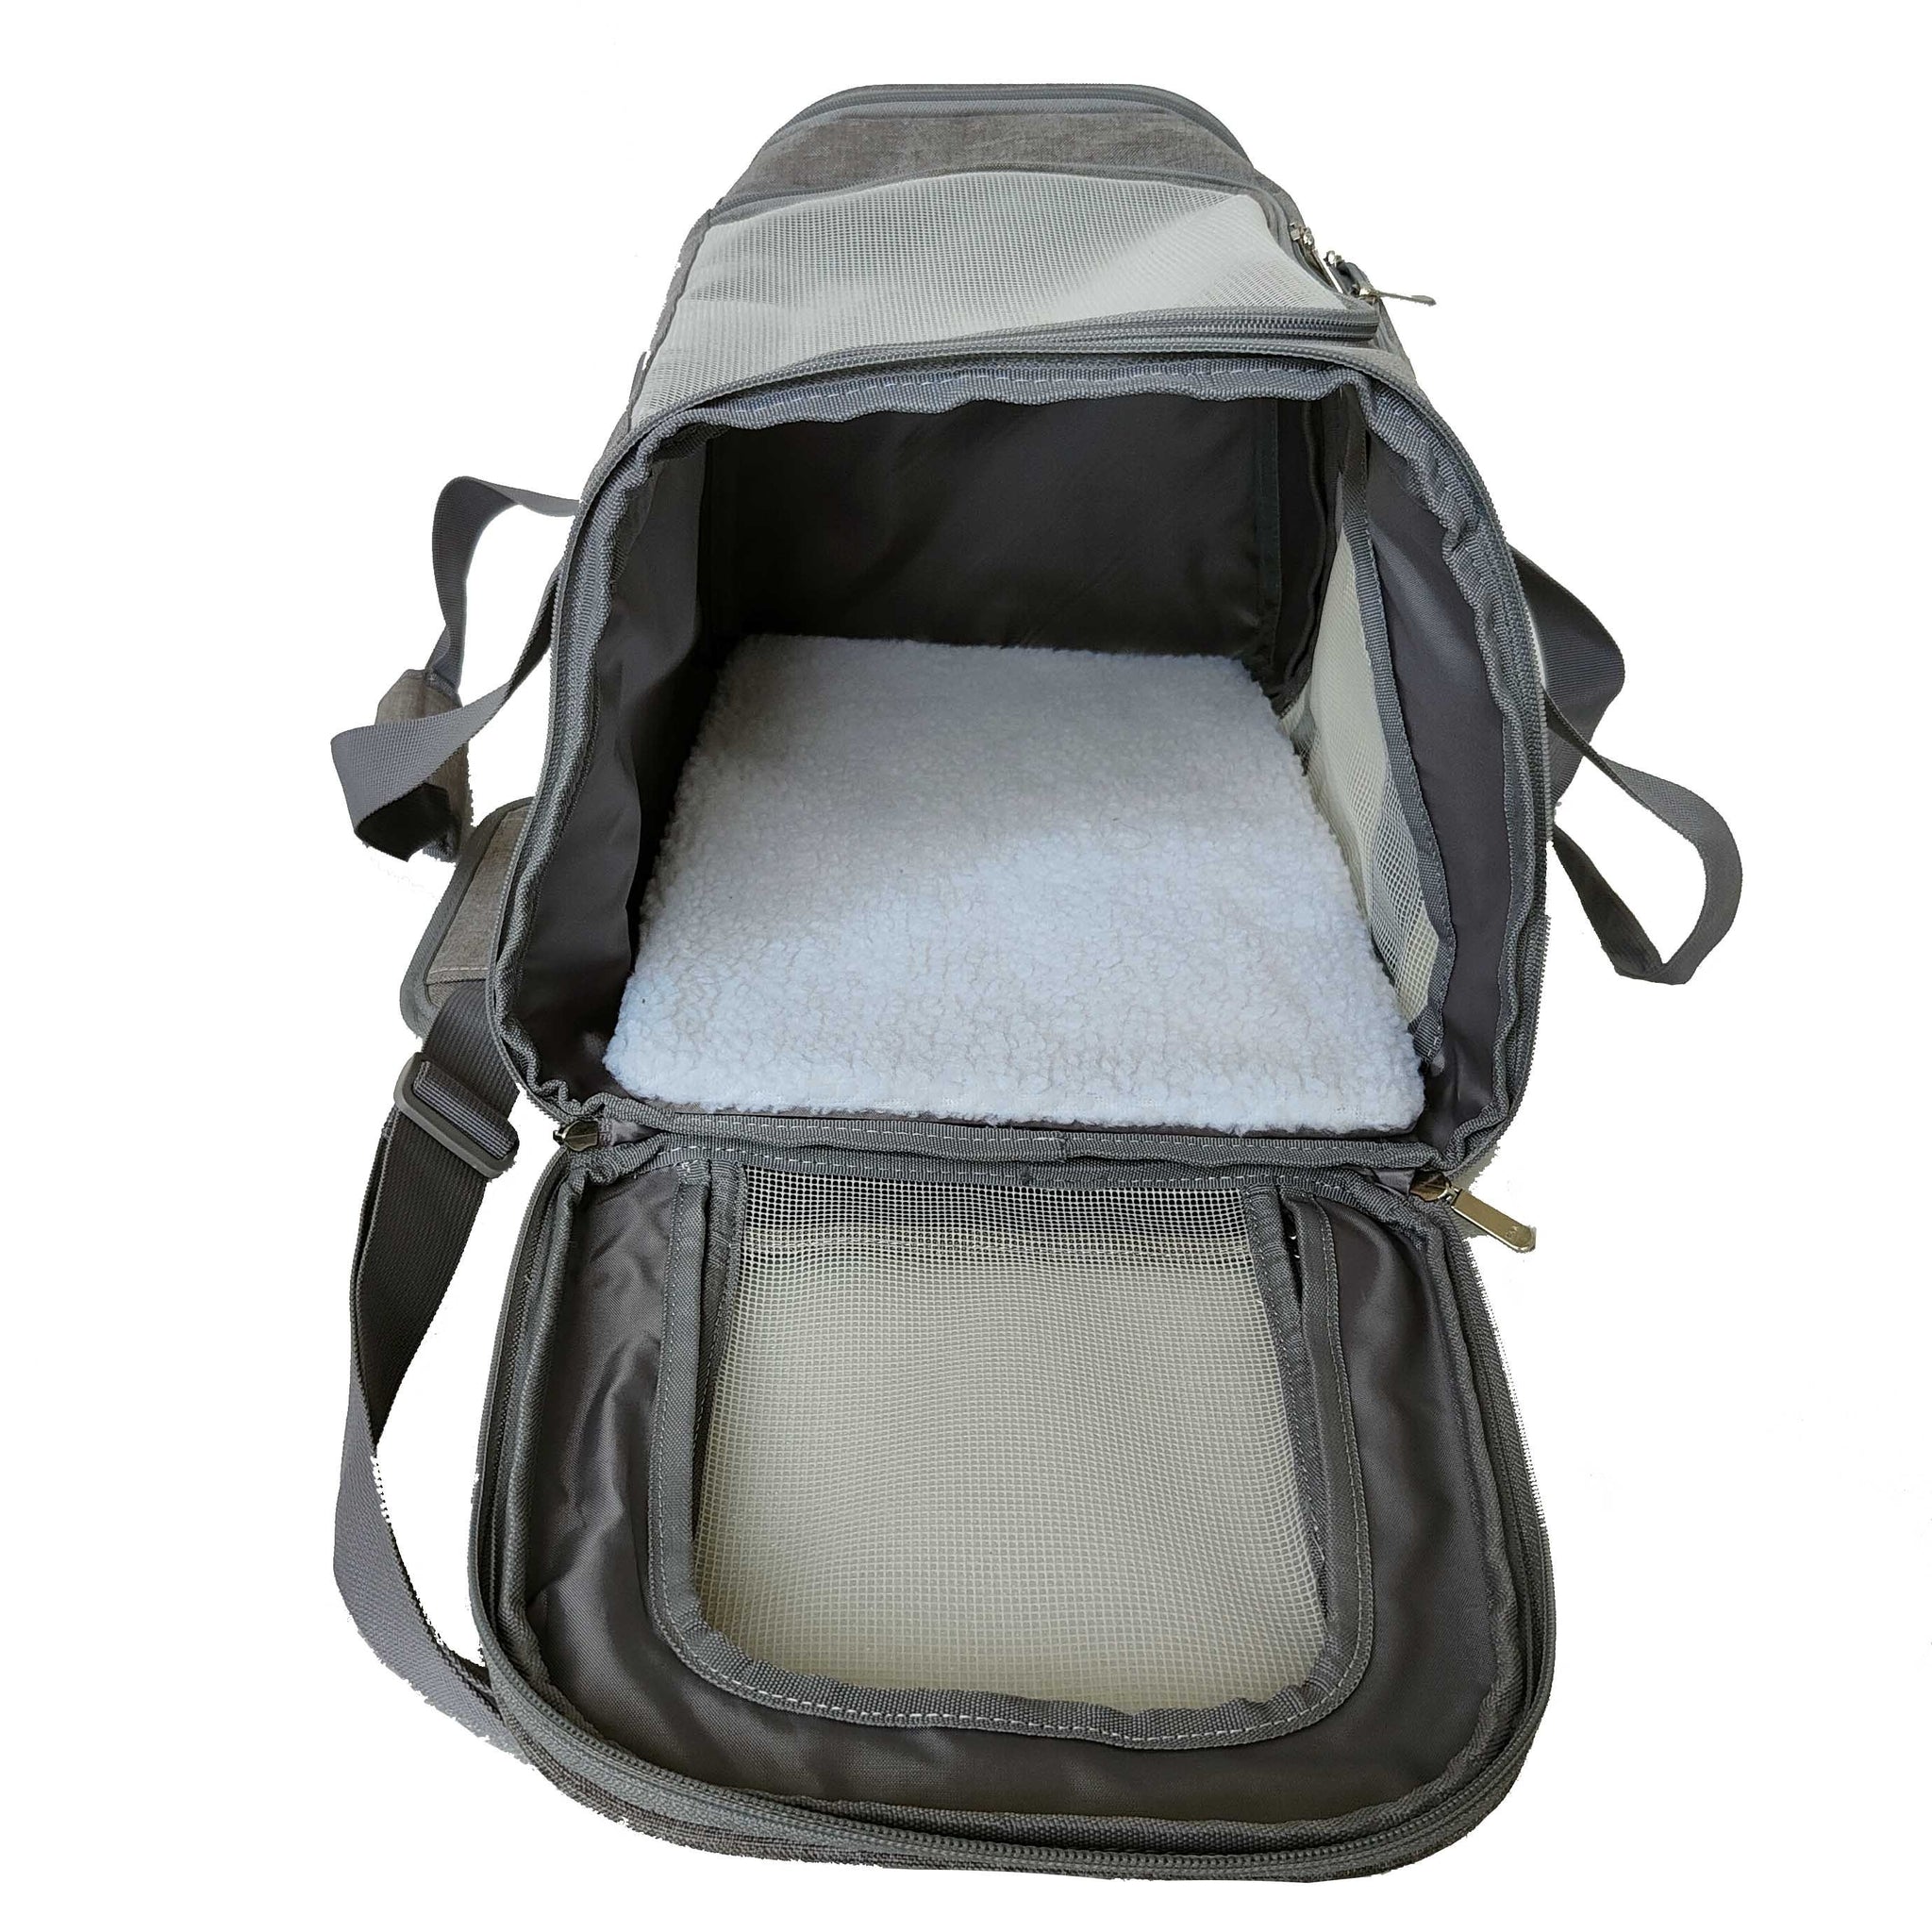 Airline Approved Pet Carrier: Large Soft-Sided Pet Travel Carrier